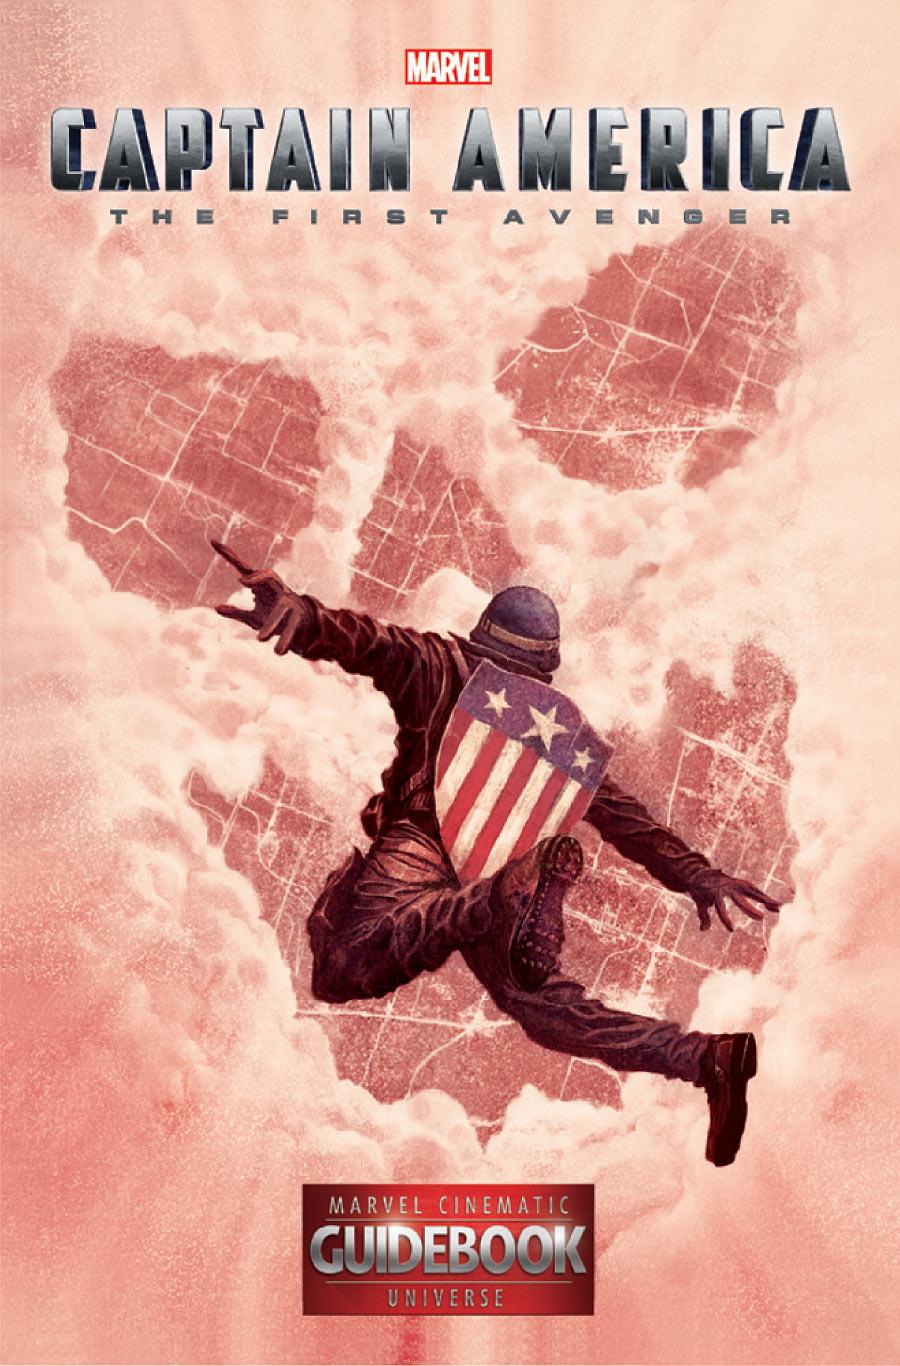 Guidebook to the Marvel Cinematic Universe - Marvel's Captain America: The First Avenger Vol. 1 #1